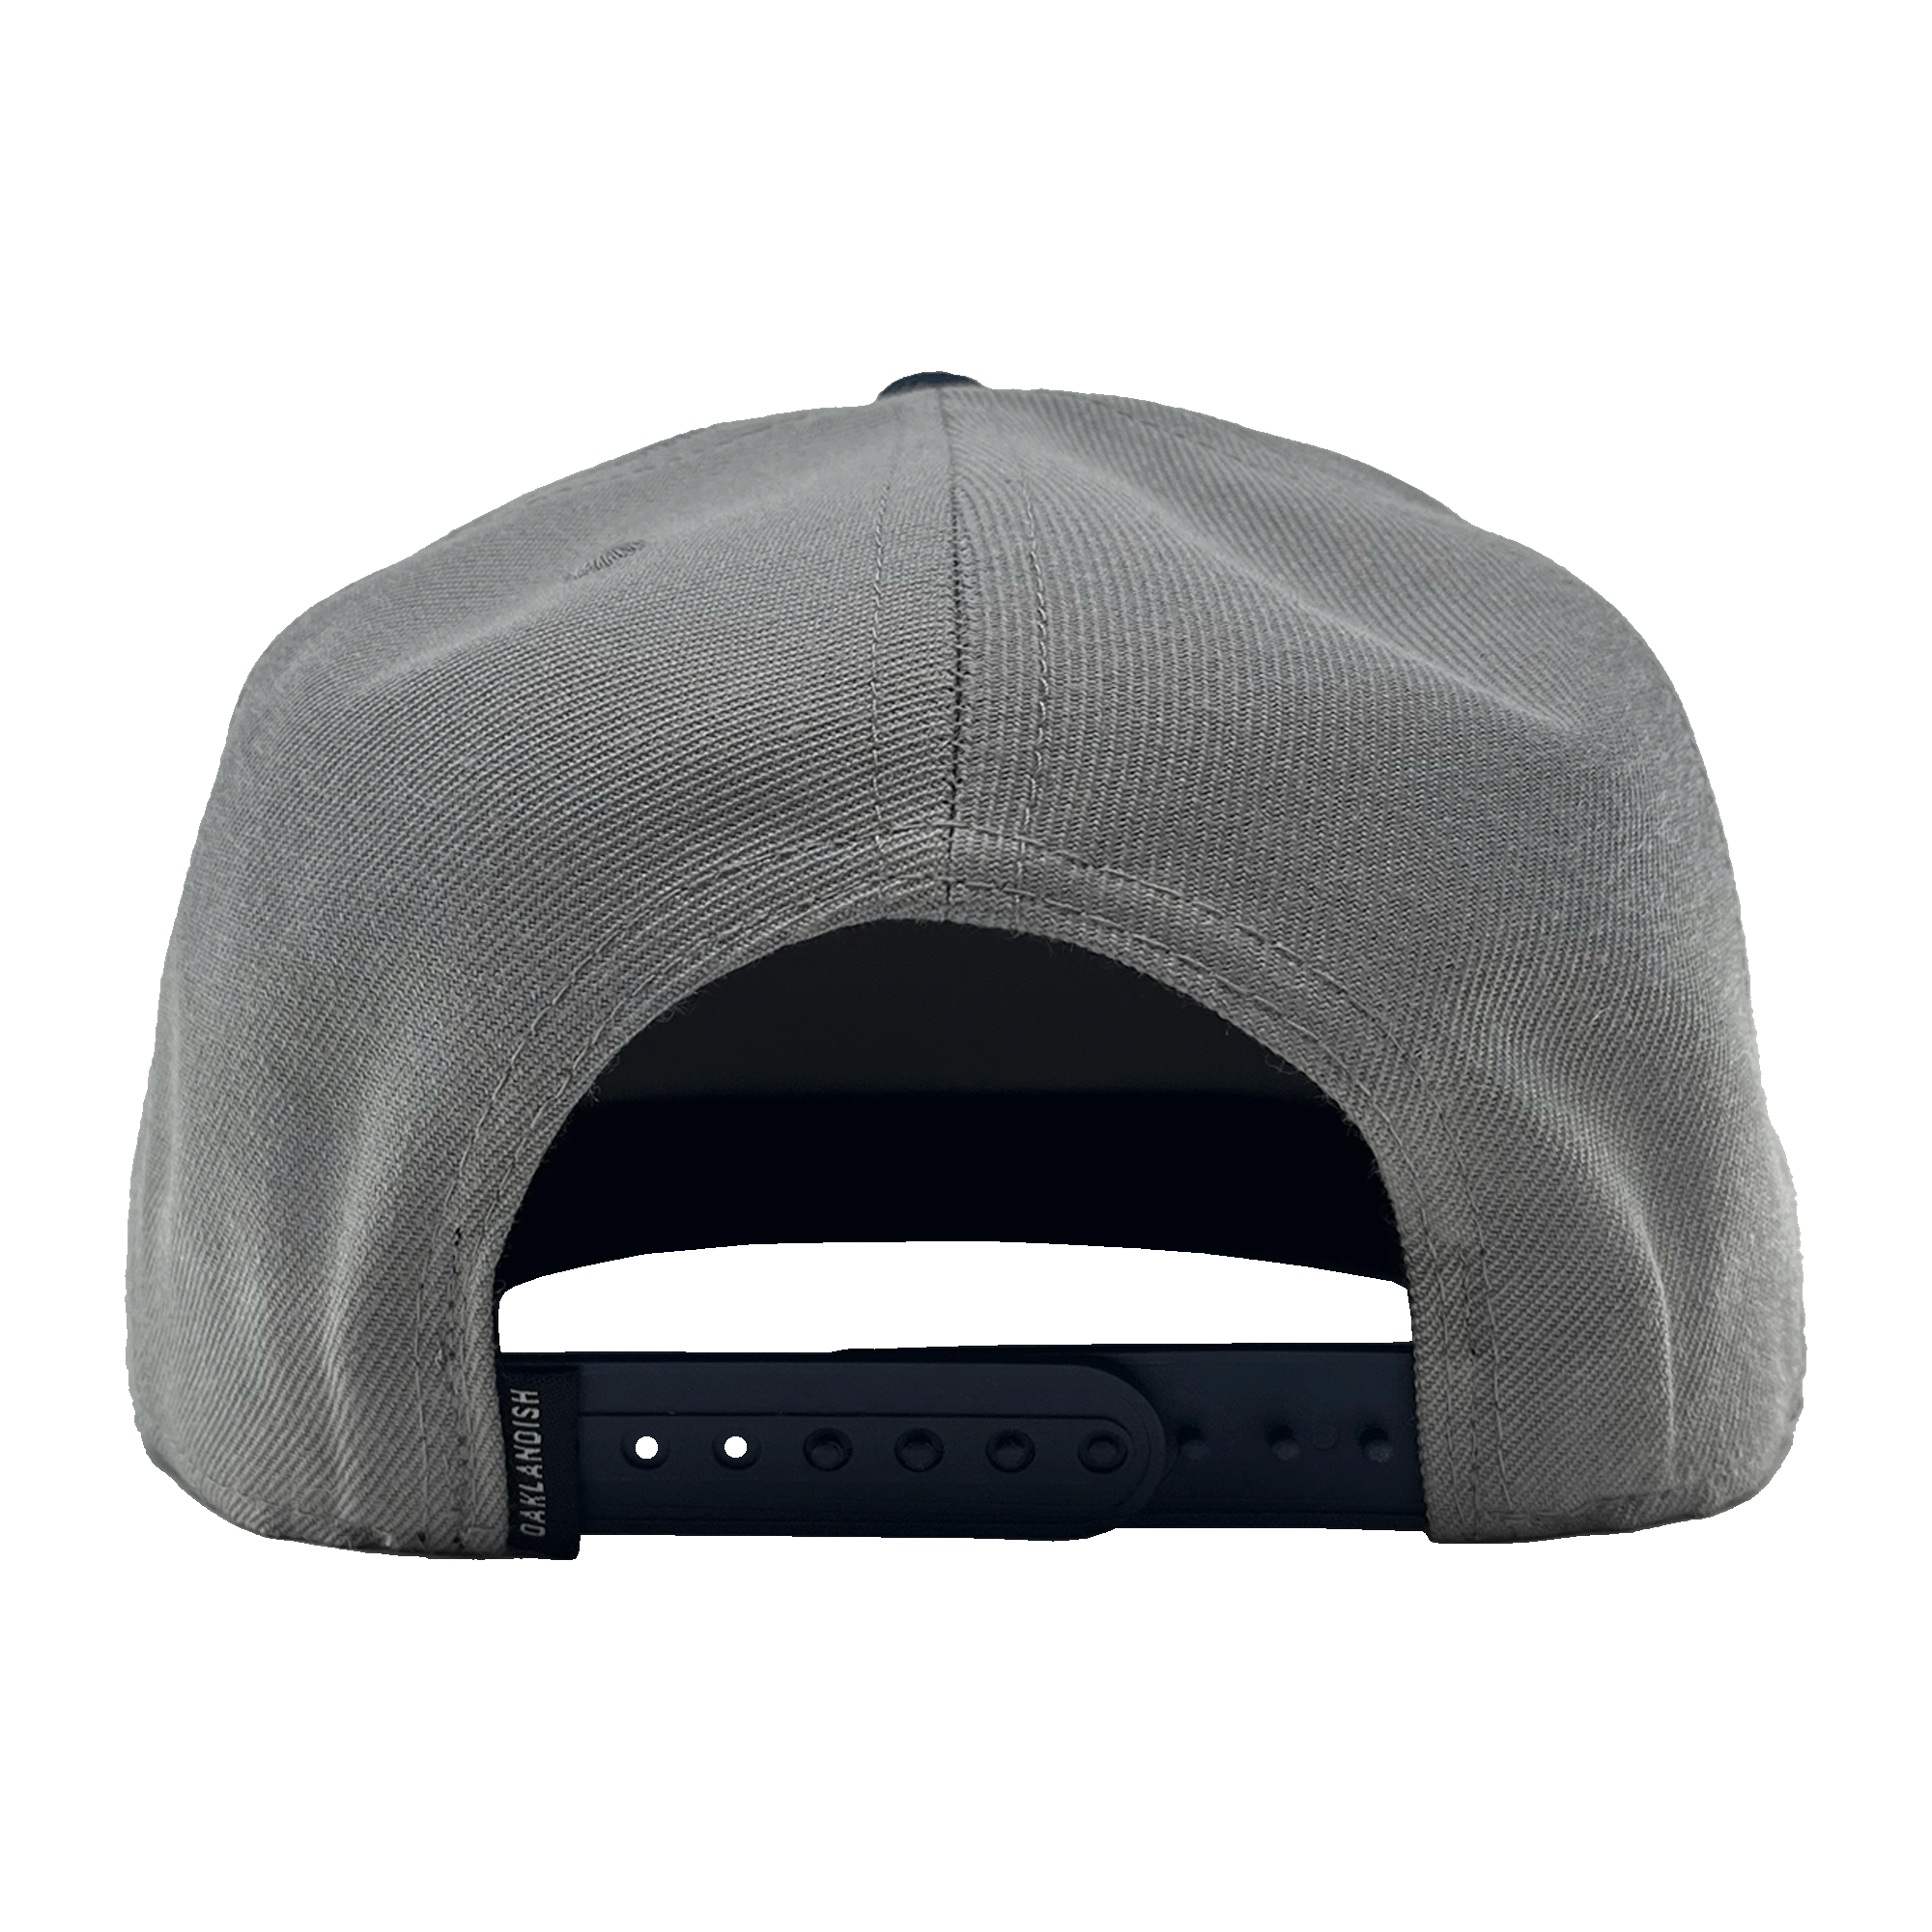 Back view of a grey hat with black adjustable snapback closure with small Oakladish wordmark tag. 